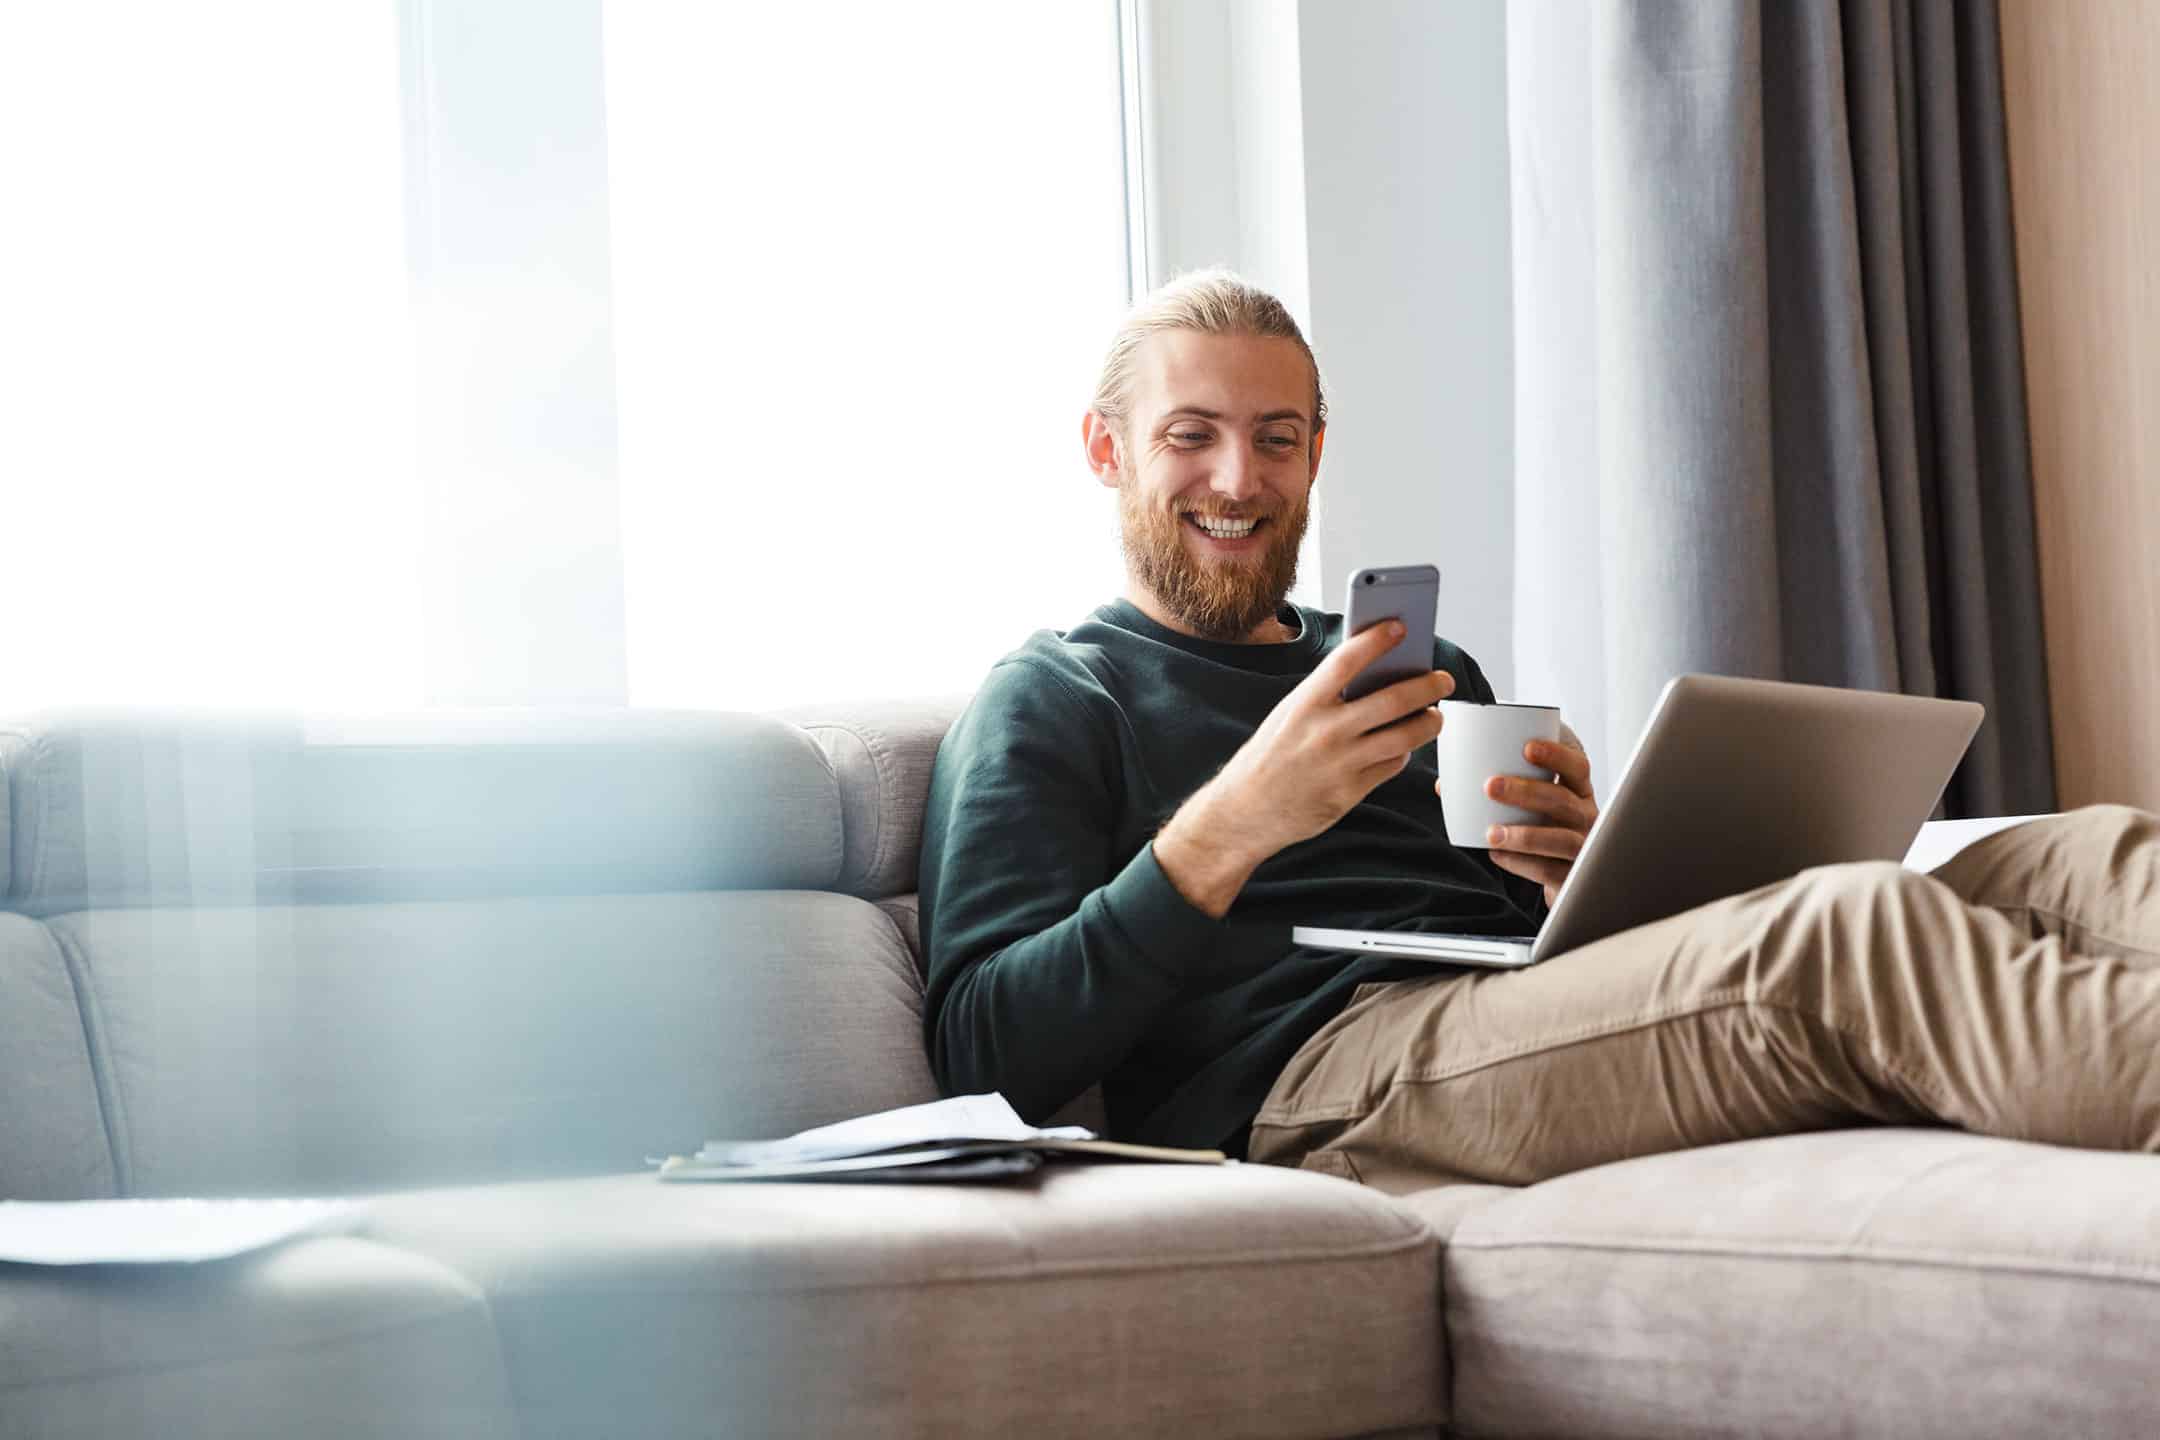 happy man sitting on couch with laptop and phone in hand